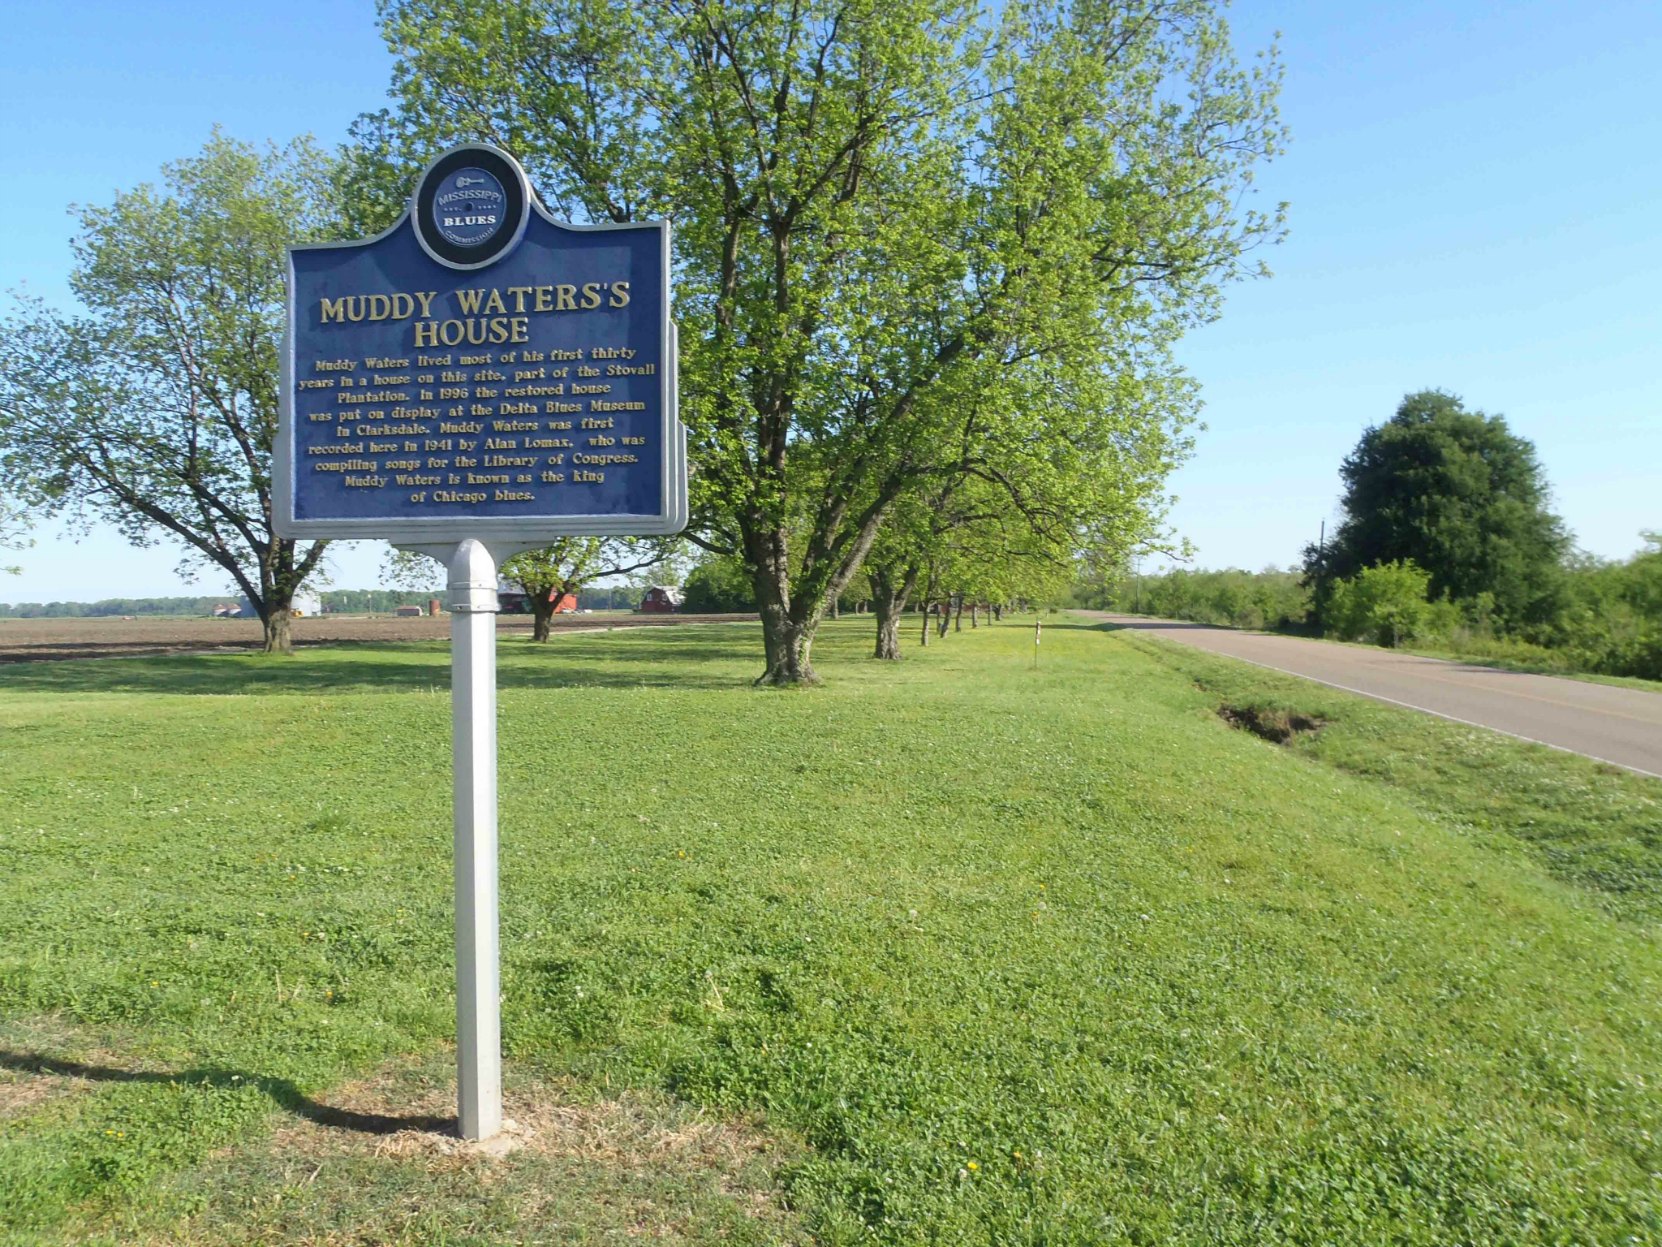 The Mississippi Blues Trail marker at the Muddy Waters House site, Stovall Farms, outside Clarksdale, Mississippi.